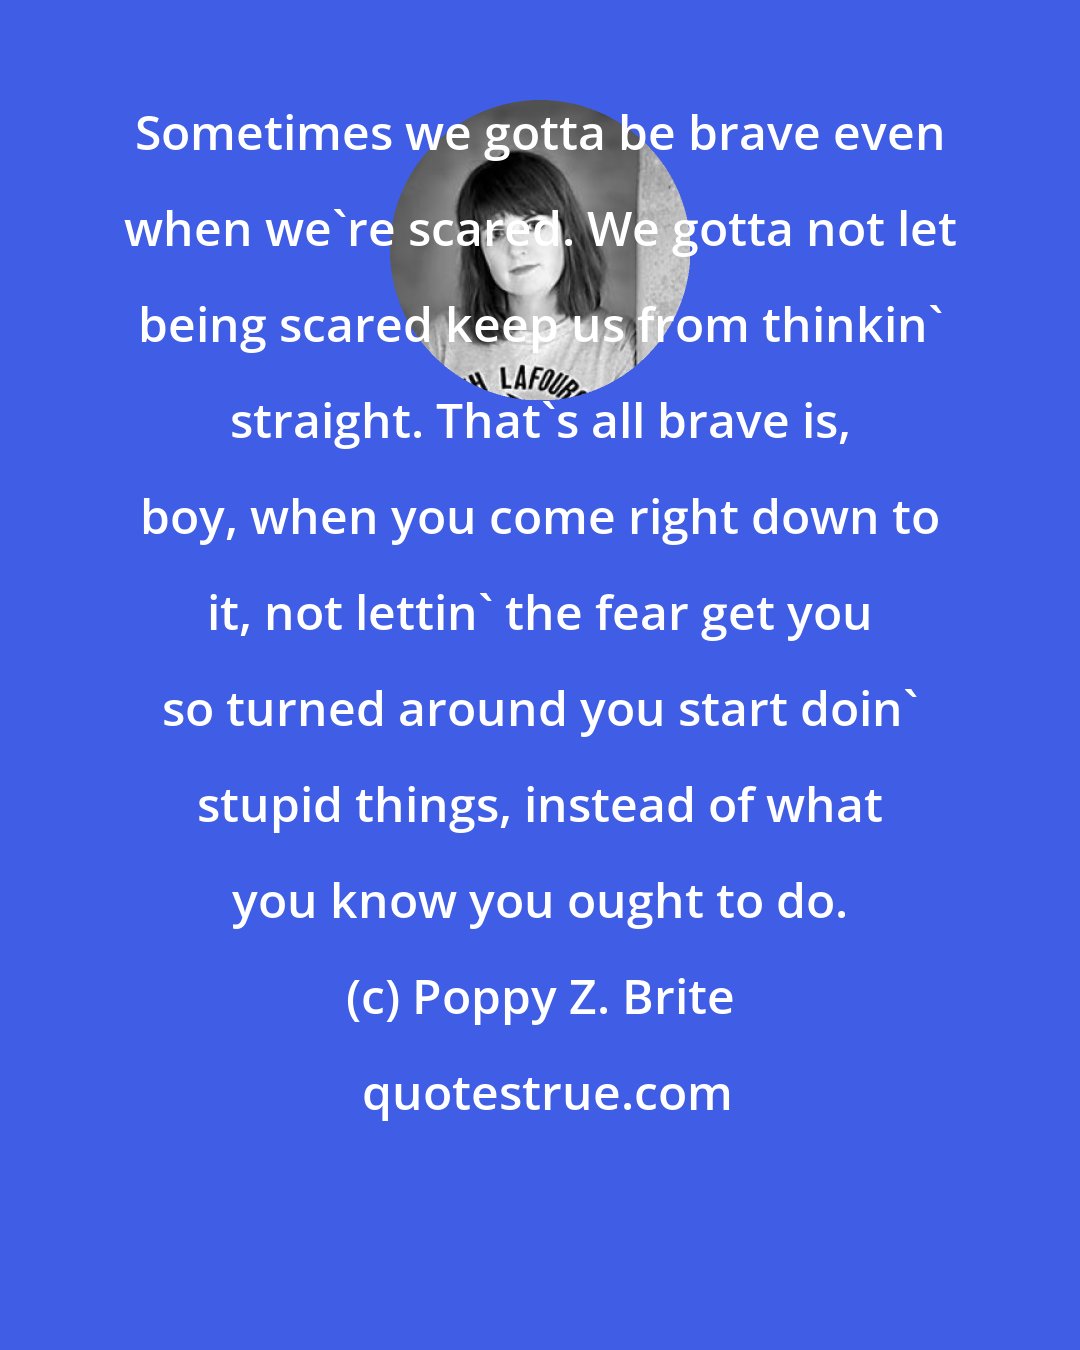 Poppy Z. Brite: Sometimes we gotta be brave even when we're scared. We gotta not let being scared keep us from thinkin' straight. That's all brave is, boy, when you come right down to it, not lettin' the fear get you so turned around you start doin' stupid things, instead of what you know you ought to do.